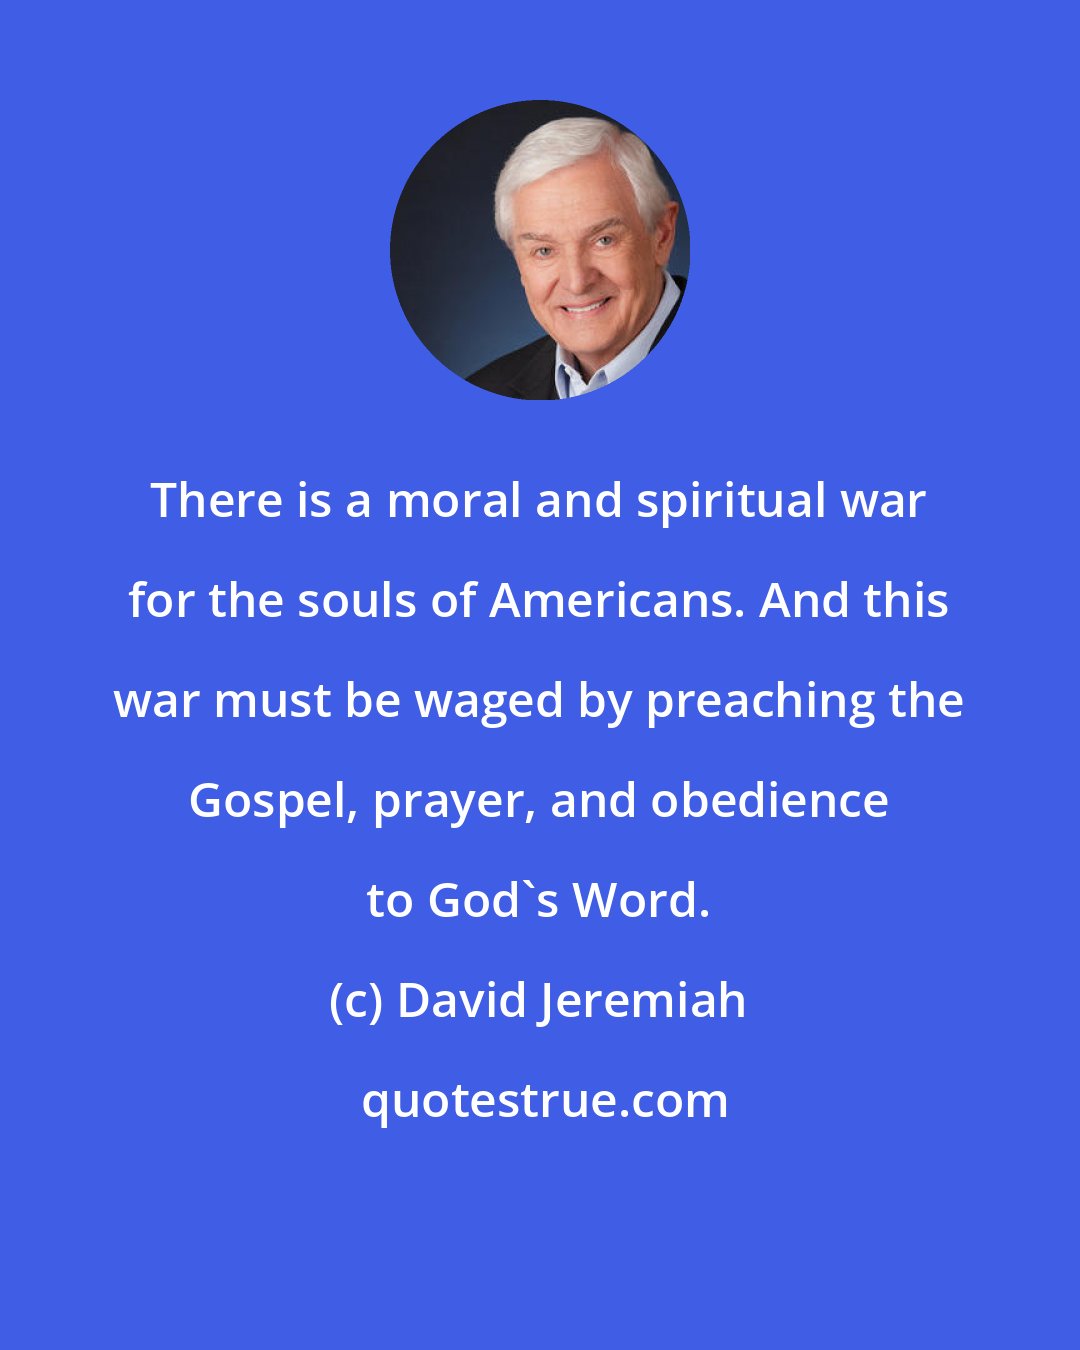 David Jeremiah: There is a moral and spiritual war for the souls of Americans. And this war must be waged by preaching the Gospel, prayer, and obedience to God's Word.